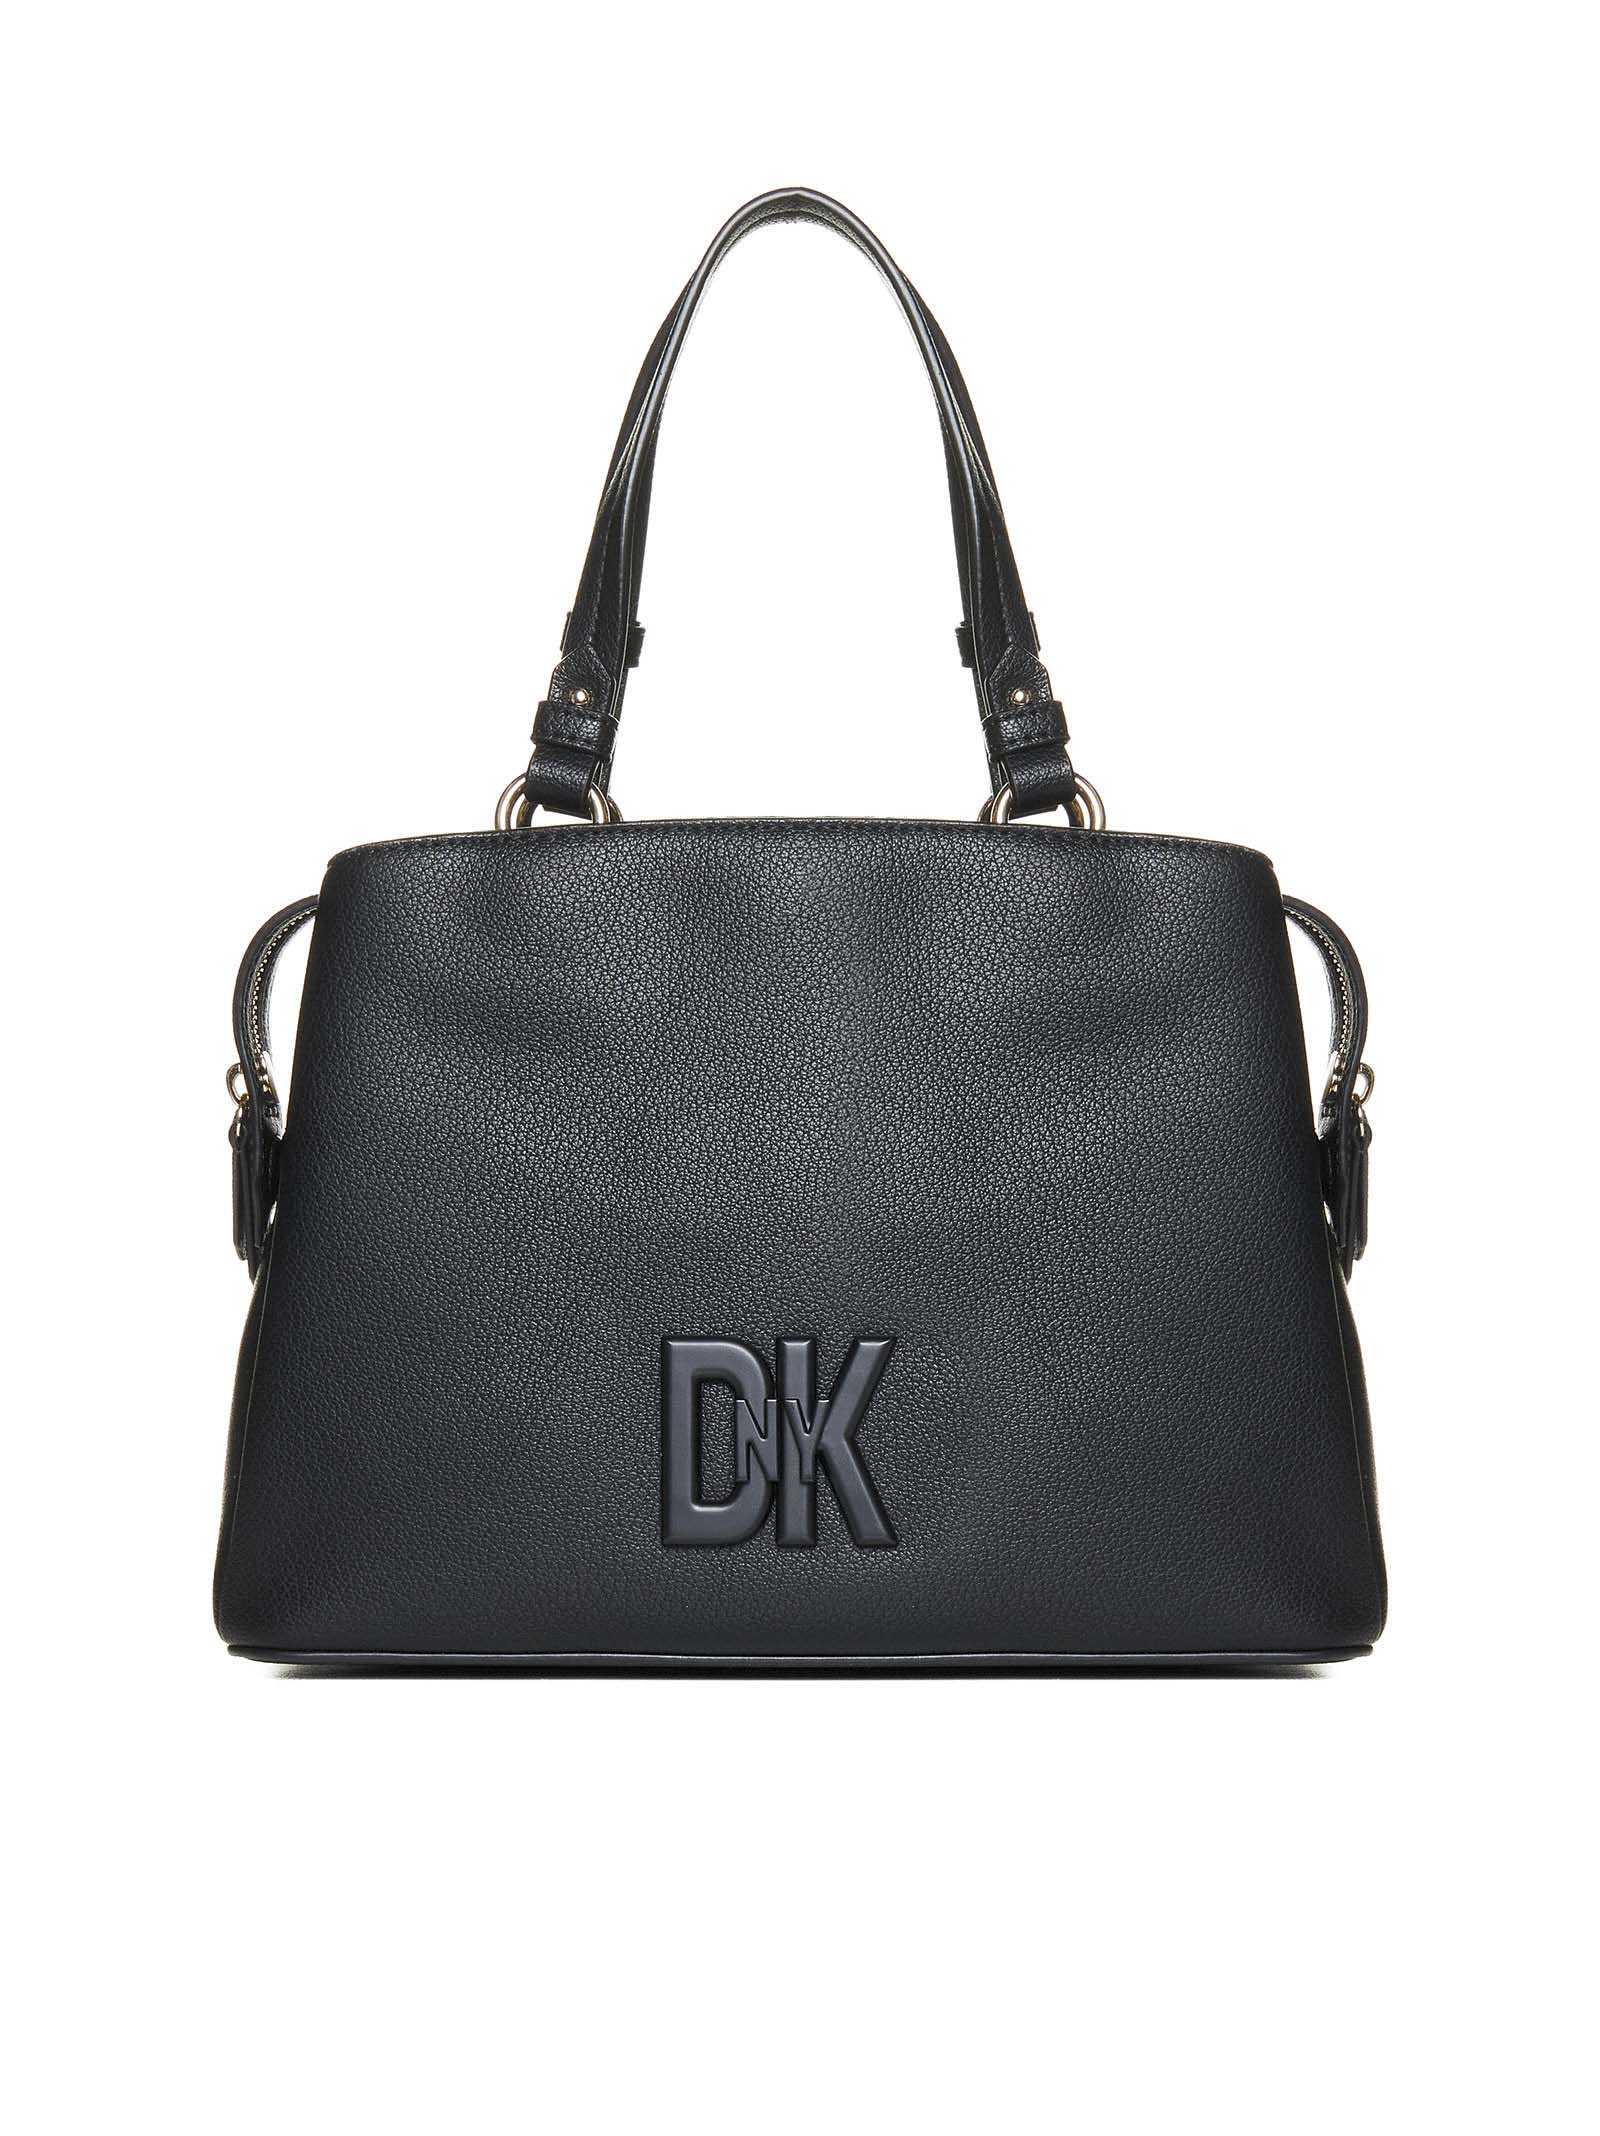 NEW DKNY purse/fanny pack with coin purse - general for sale - by owner -  craigslist